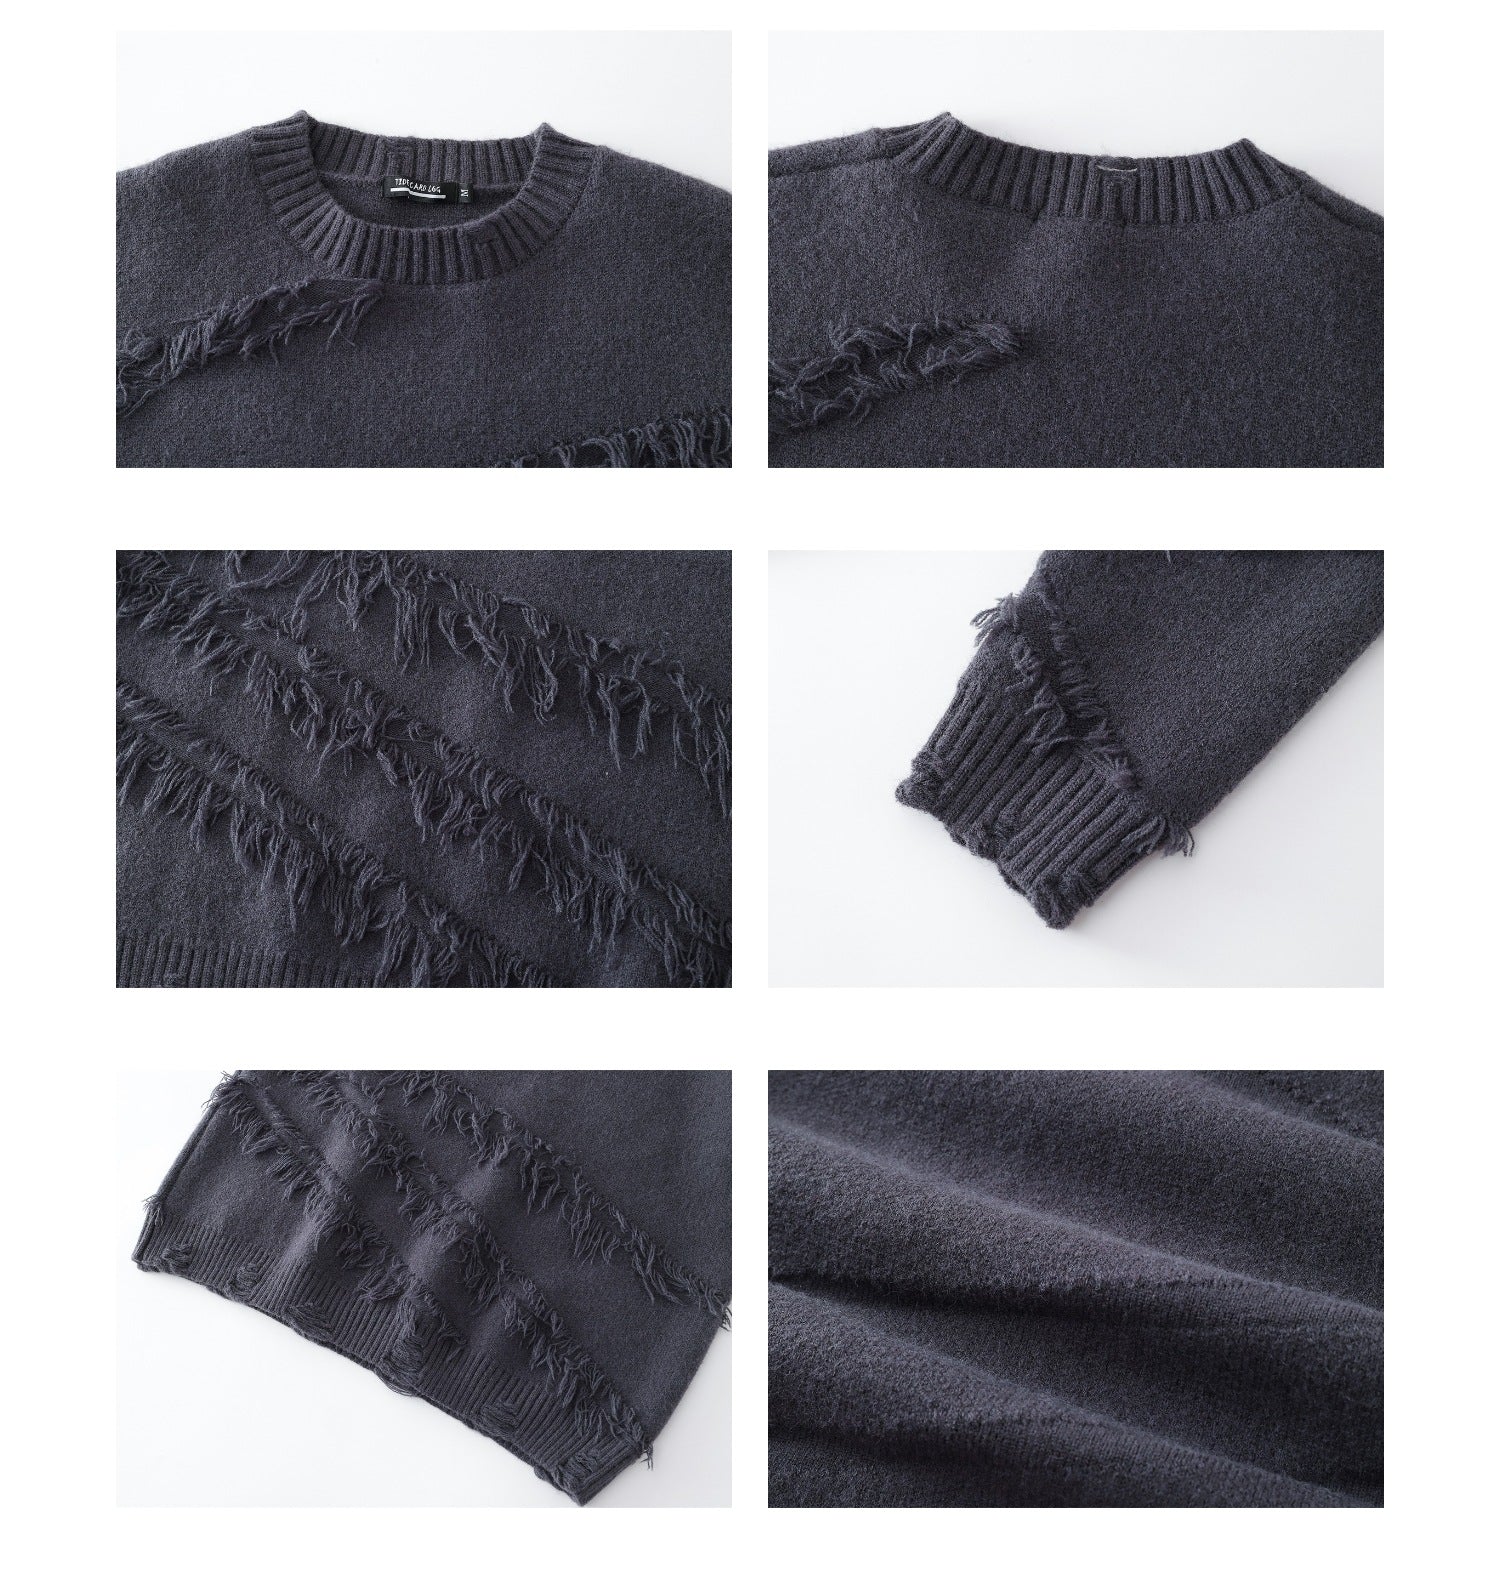 Men's And Women's Autumn And Winter Loose Lazy Chic Soft Glutinous Chic Sweater - NextthinkShop